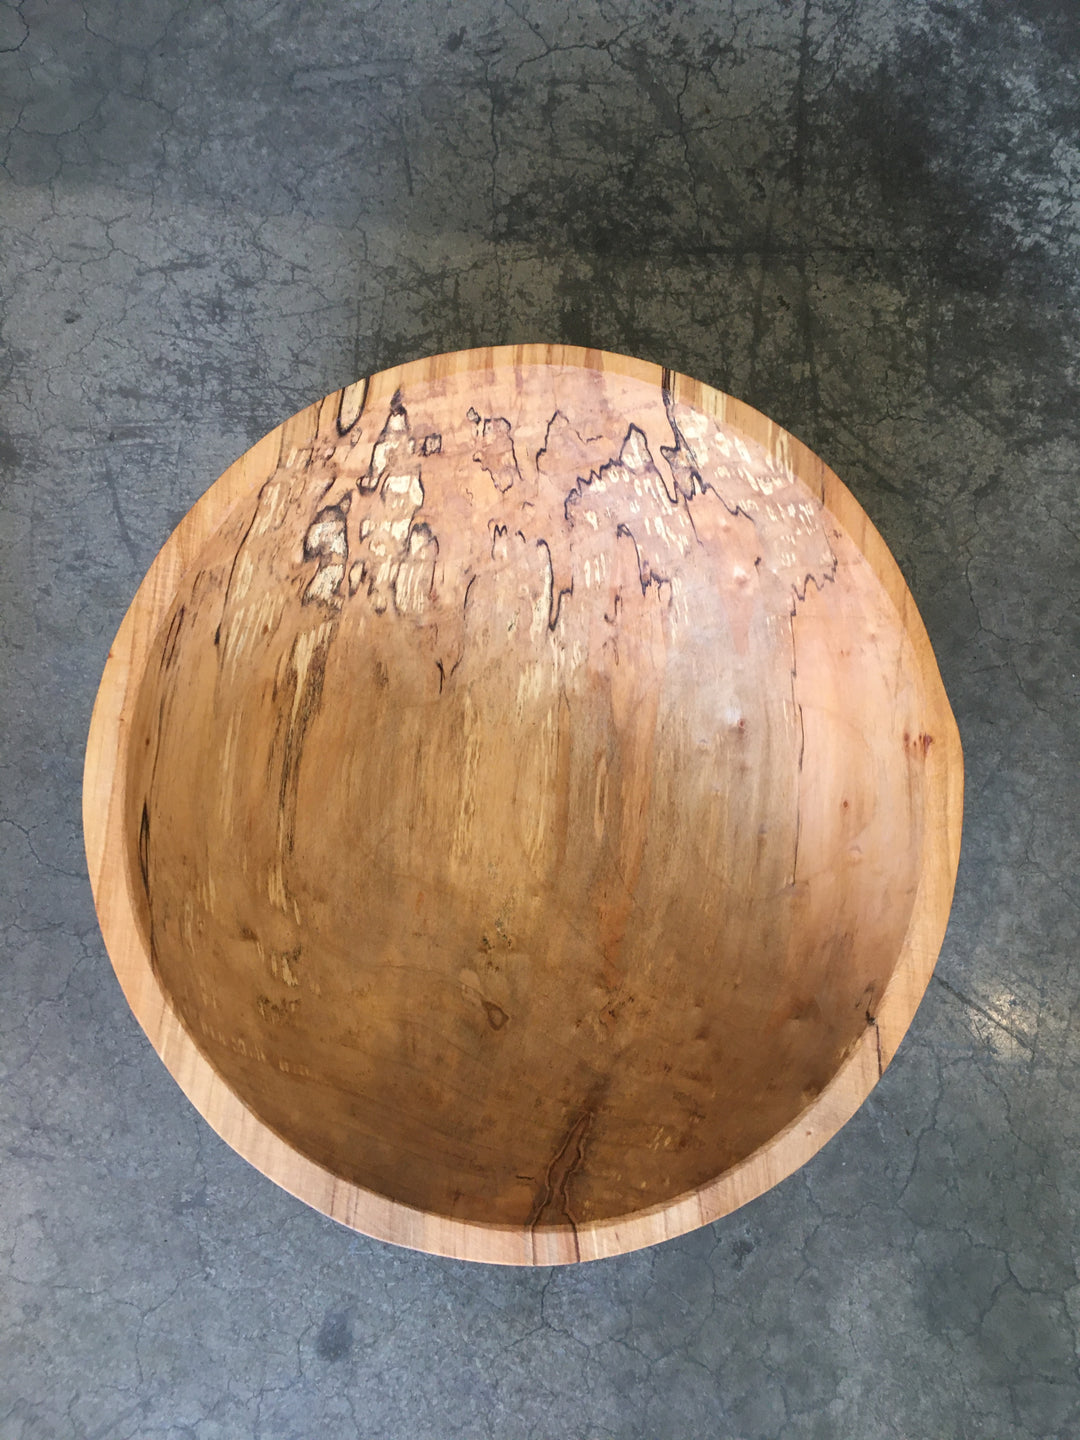 Spencer Peterman - Classic Spalted Maple Bowl | A | 13"